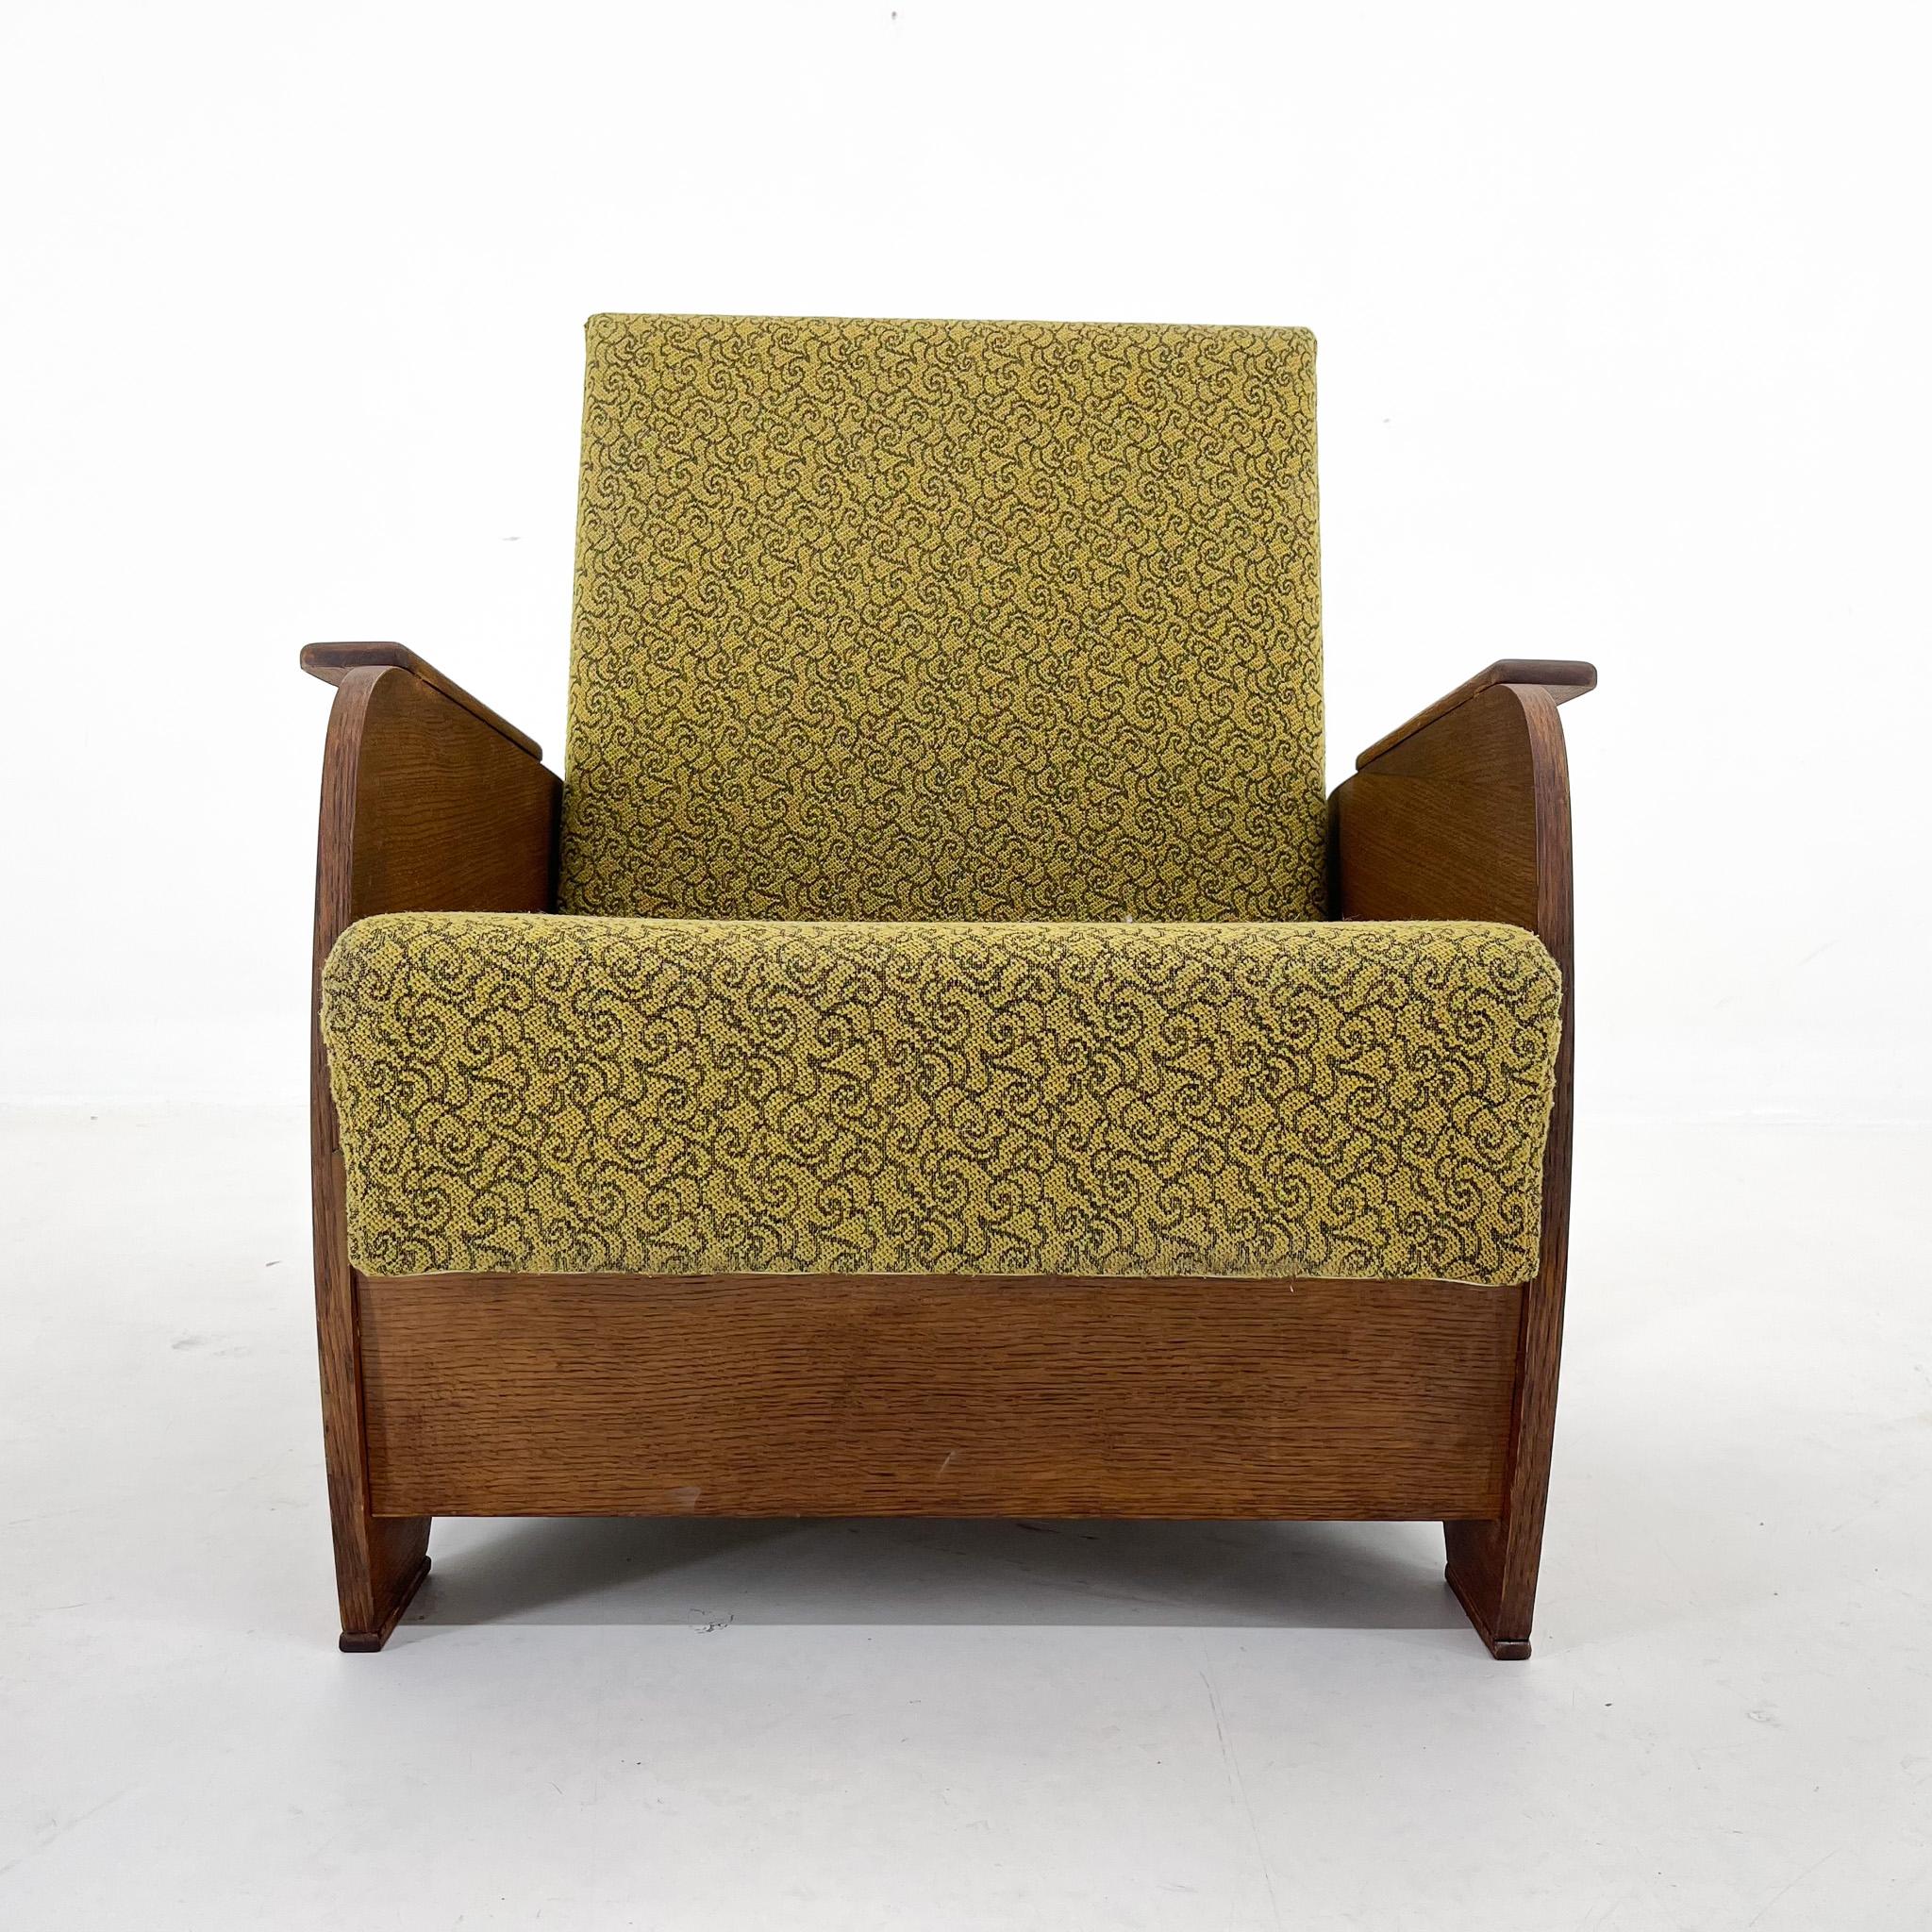 20th Century 1960s Armchair Convertible to Daybed, Czechoslovakia / 2 Pieces Available For Sale